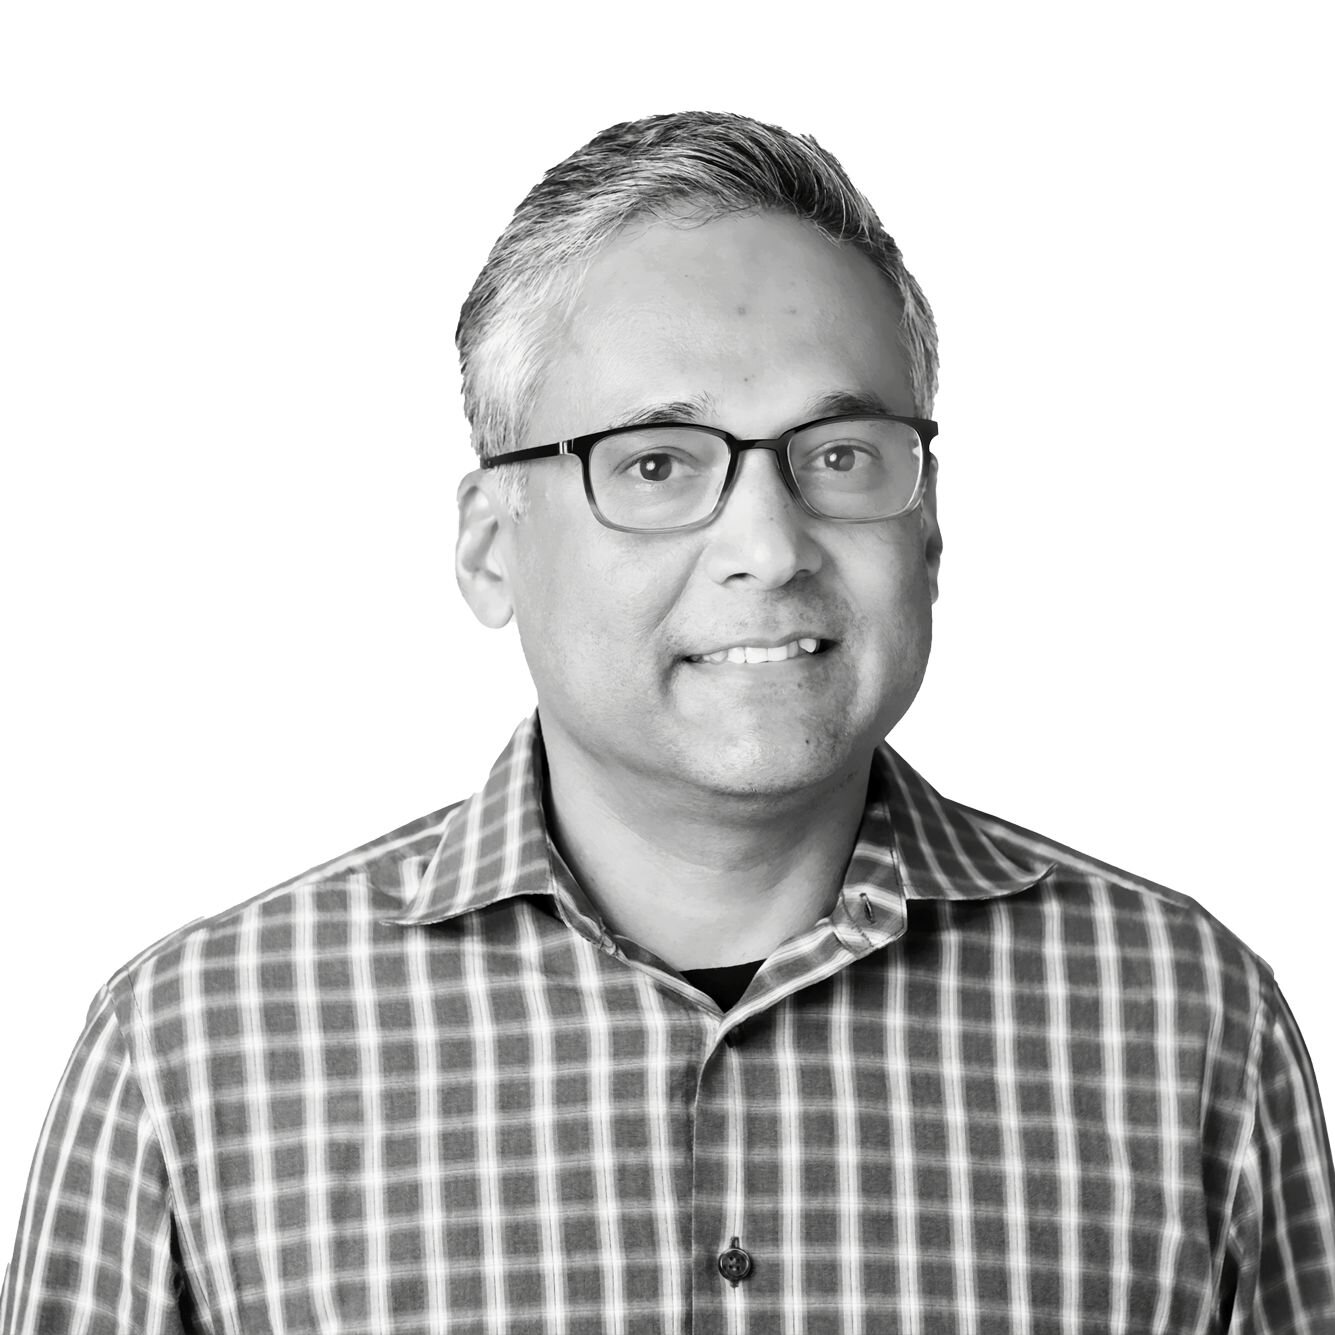 Rahul Roy-Chowdhury Indian-American middle-aged man. He is wearing glasses and a plaid shirt, with short hair neatly styled. He is smiling warmly, looking directly at the camera, which creates an inviting and approachable impression. The monochromatic color scheme adds a classic feel to the portrait, emphasizing his friendly demeanor.